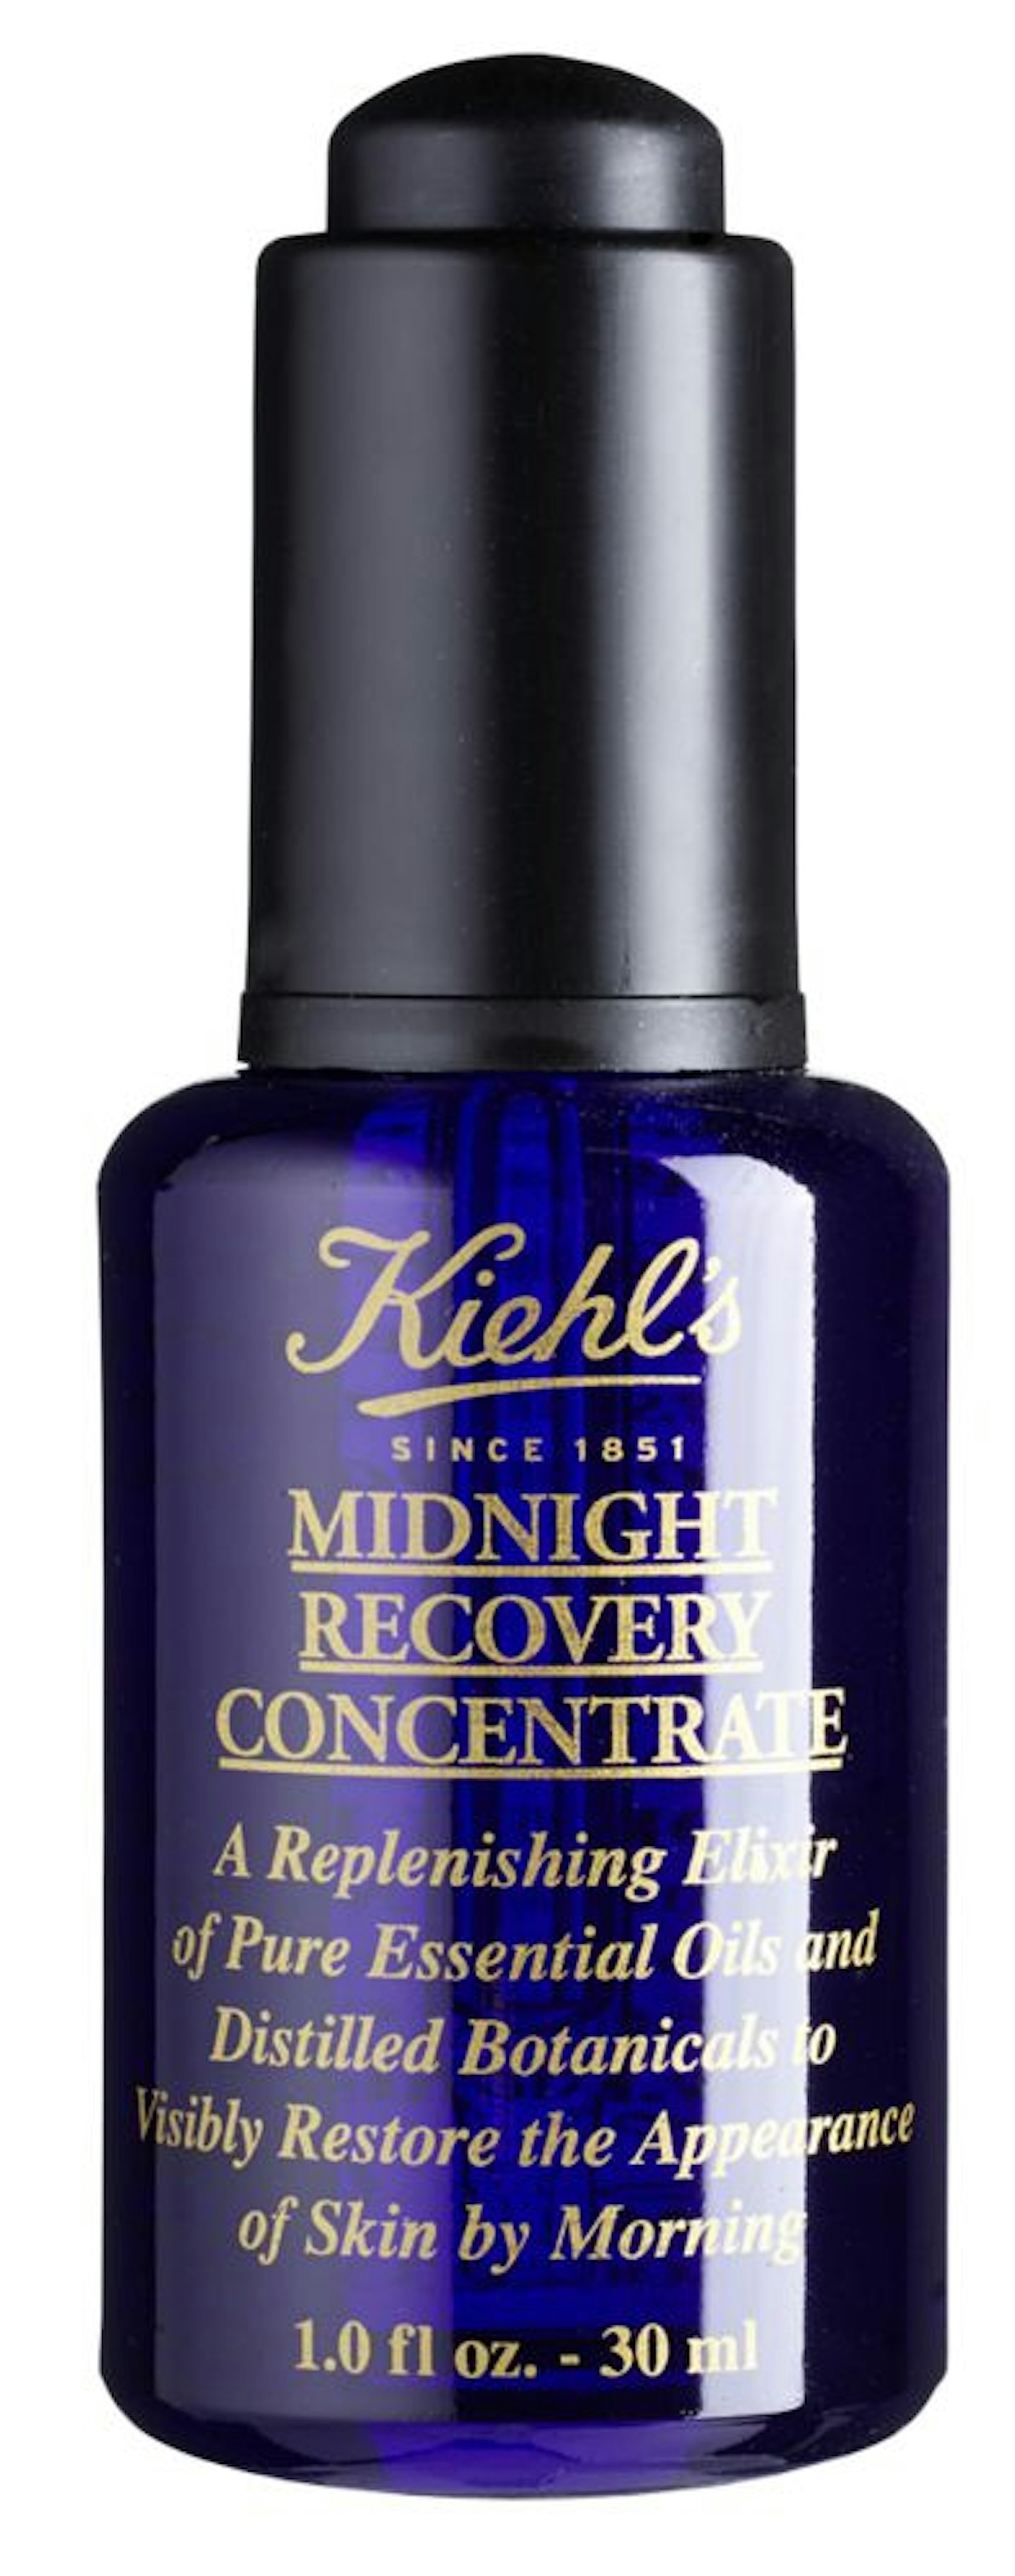 Kiehlu2019s Midnight Recovery Concentrate, £38